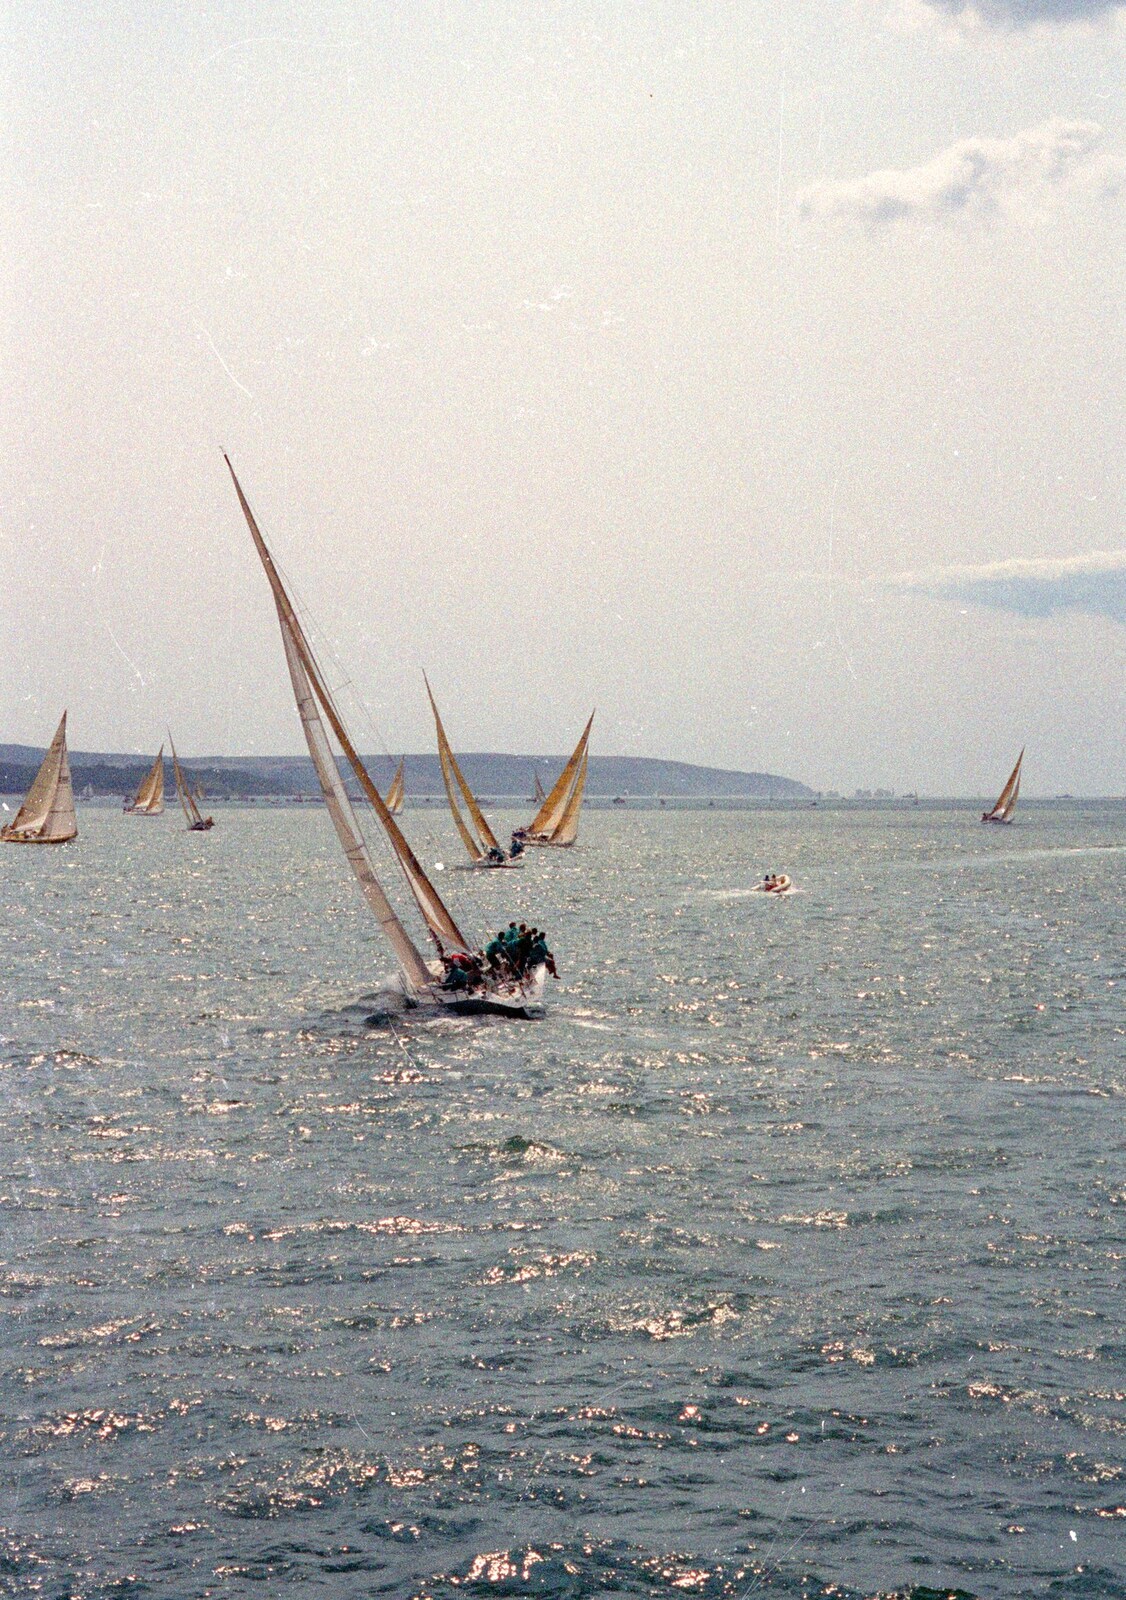 Yachts on the Solent from Back from Uni: Yarmouth, Alum Bay and Barton-on-sea, Hampshire - 23rd July 1989